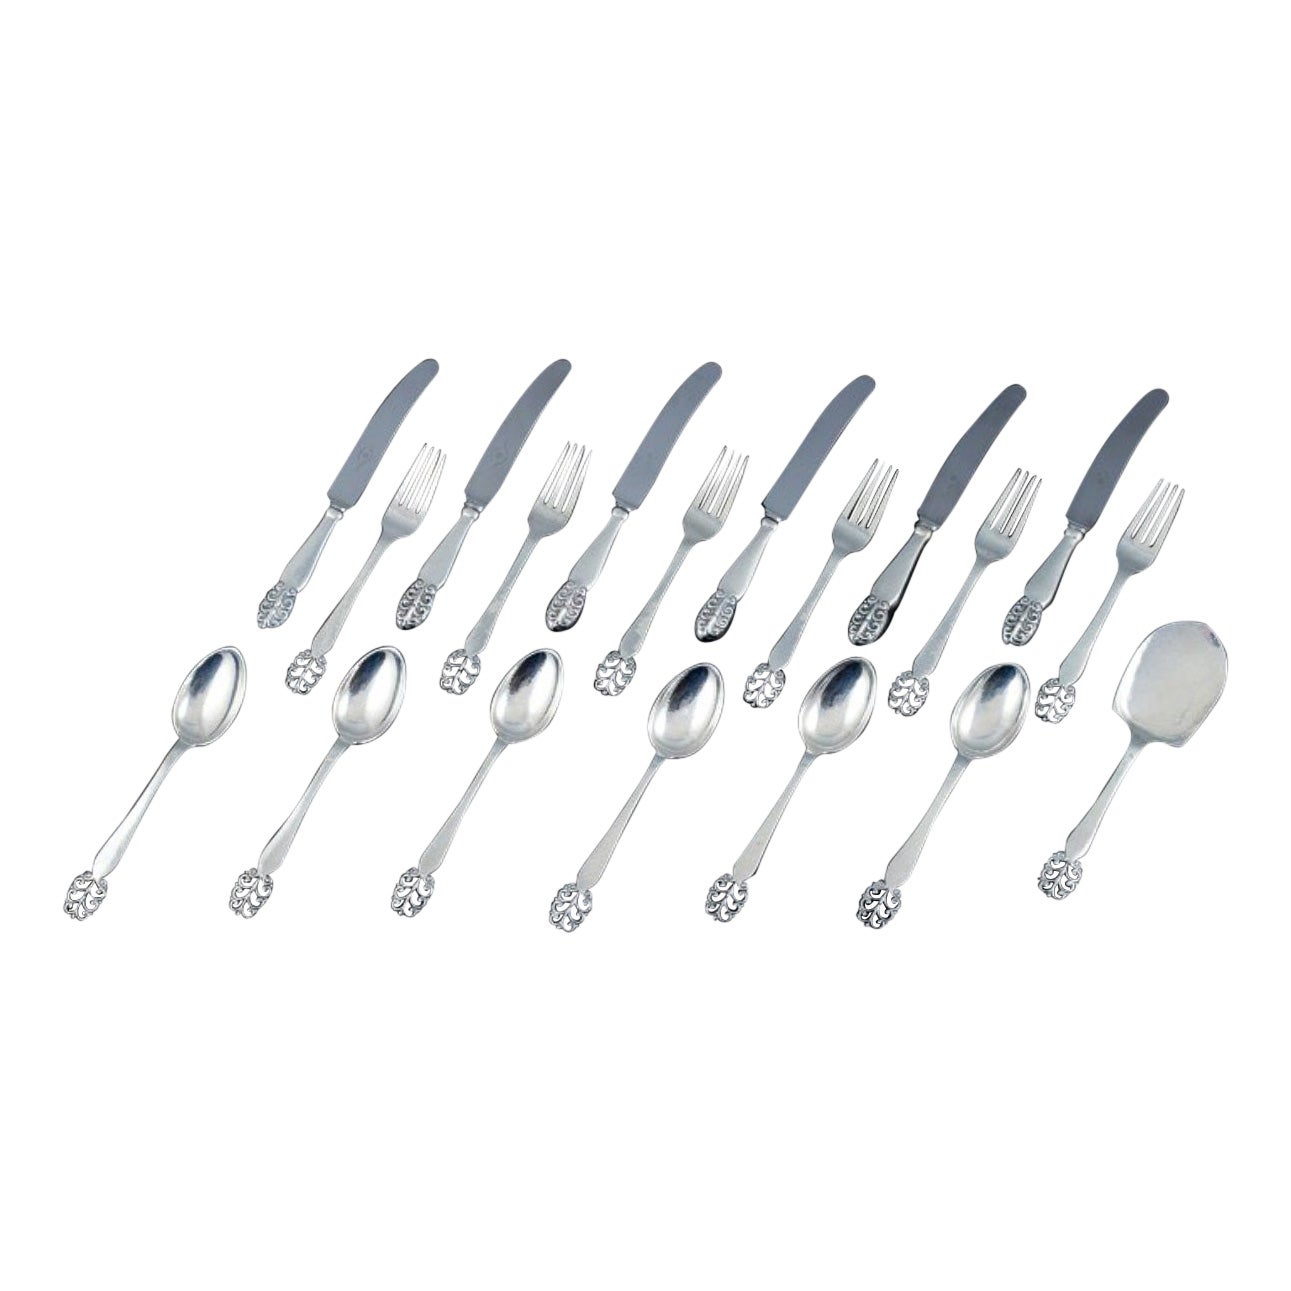 Danish Silversmith, Complete Lunch Service for Six People. a Total of 19 Pieces